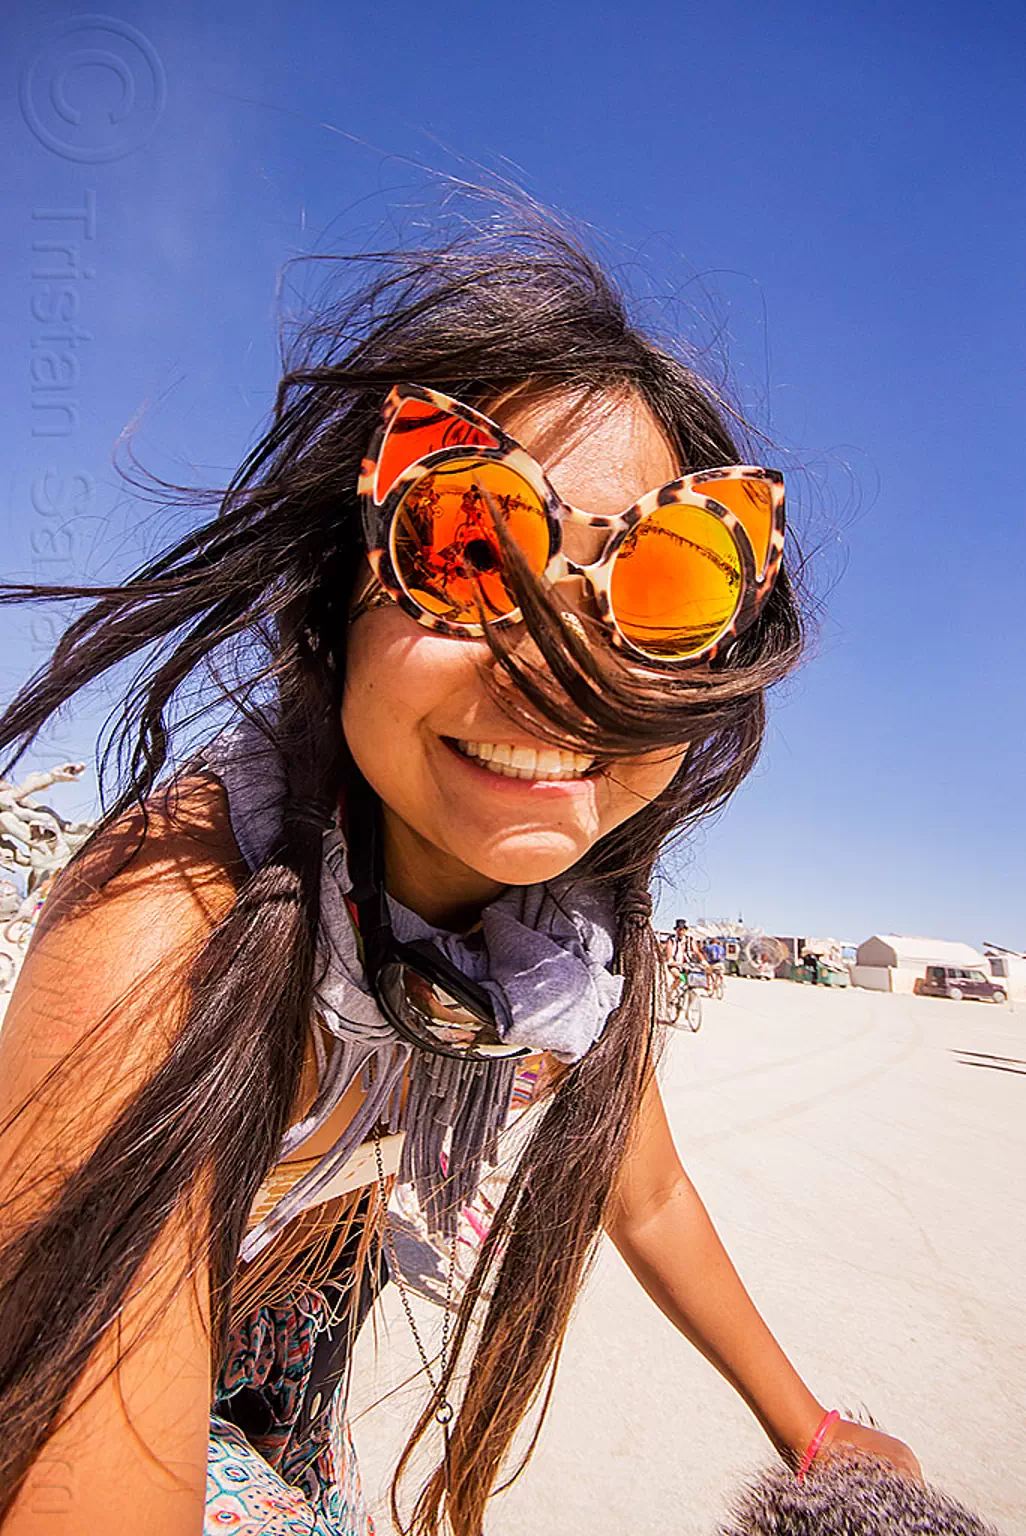 japanese girl with tiger mirror sunglasses - burning man 2015, burning man, mirror sunglasses, nicole, tiger sunglasses, woman